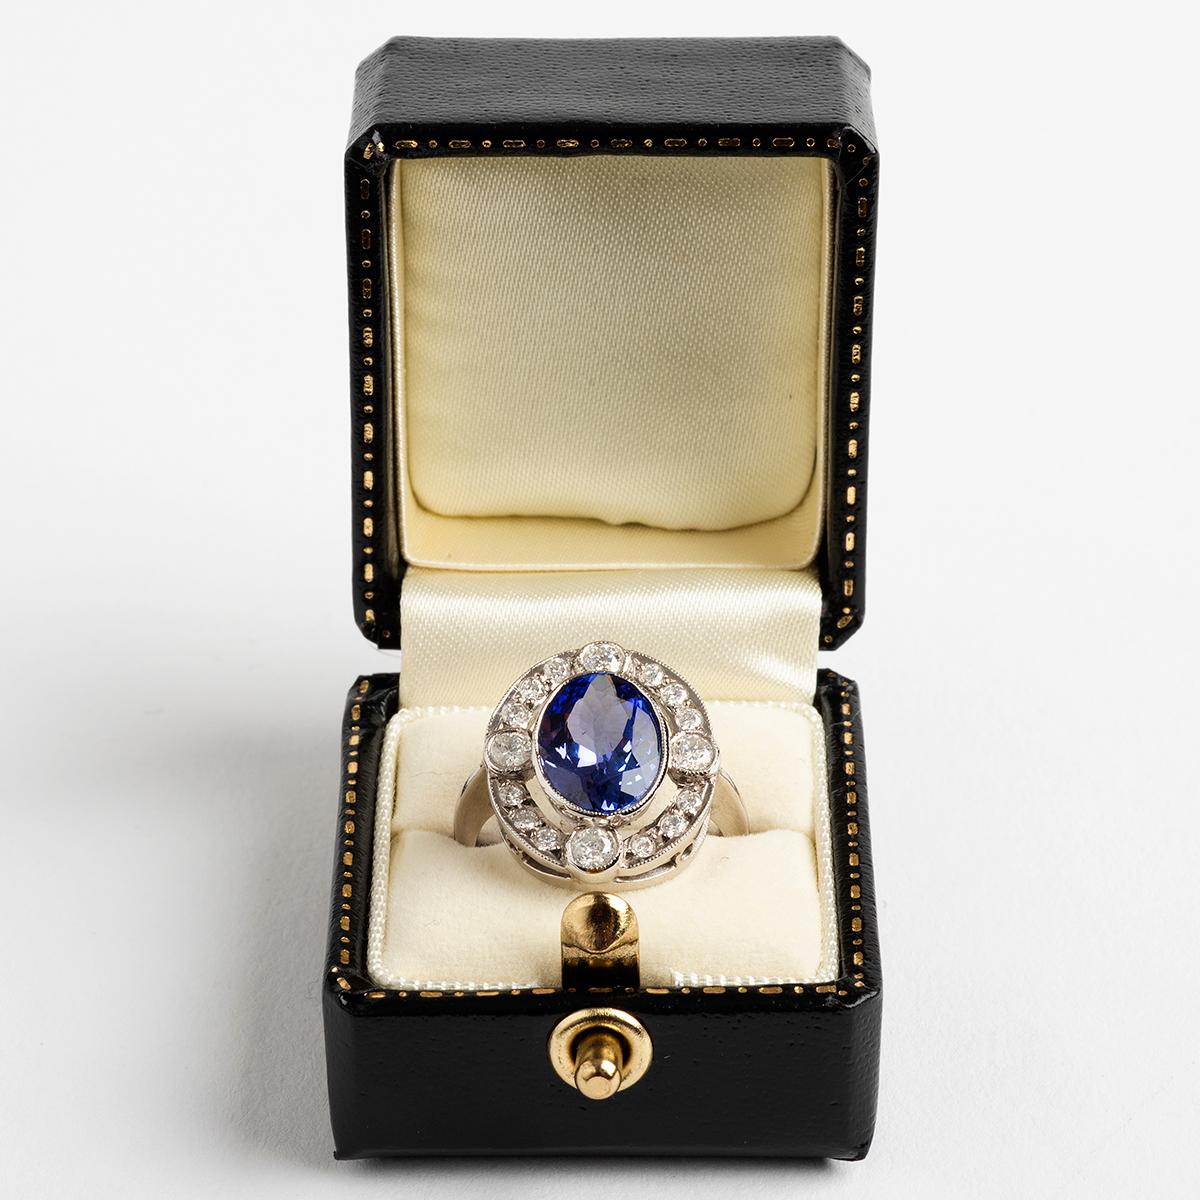 Our extremely large tanzanite (est. 8.5ct) and diamond (est. 1.00ct) cluster ring with 18k white gold band also features a migraine rubber setting. A wonderful statement ring, certain to add to any serious collection. The ring size is N.

A unique